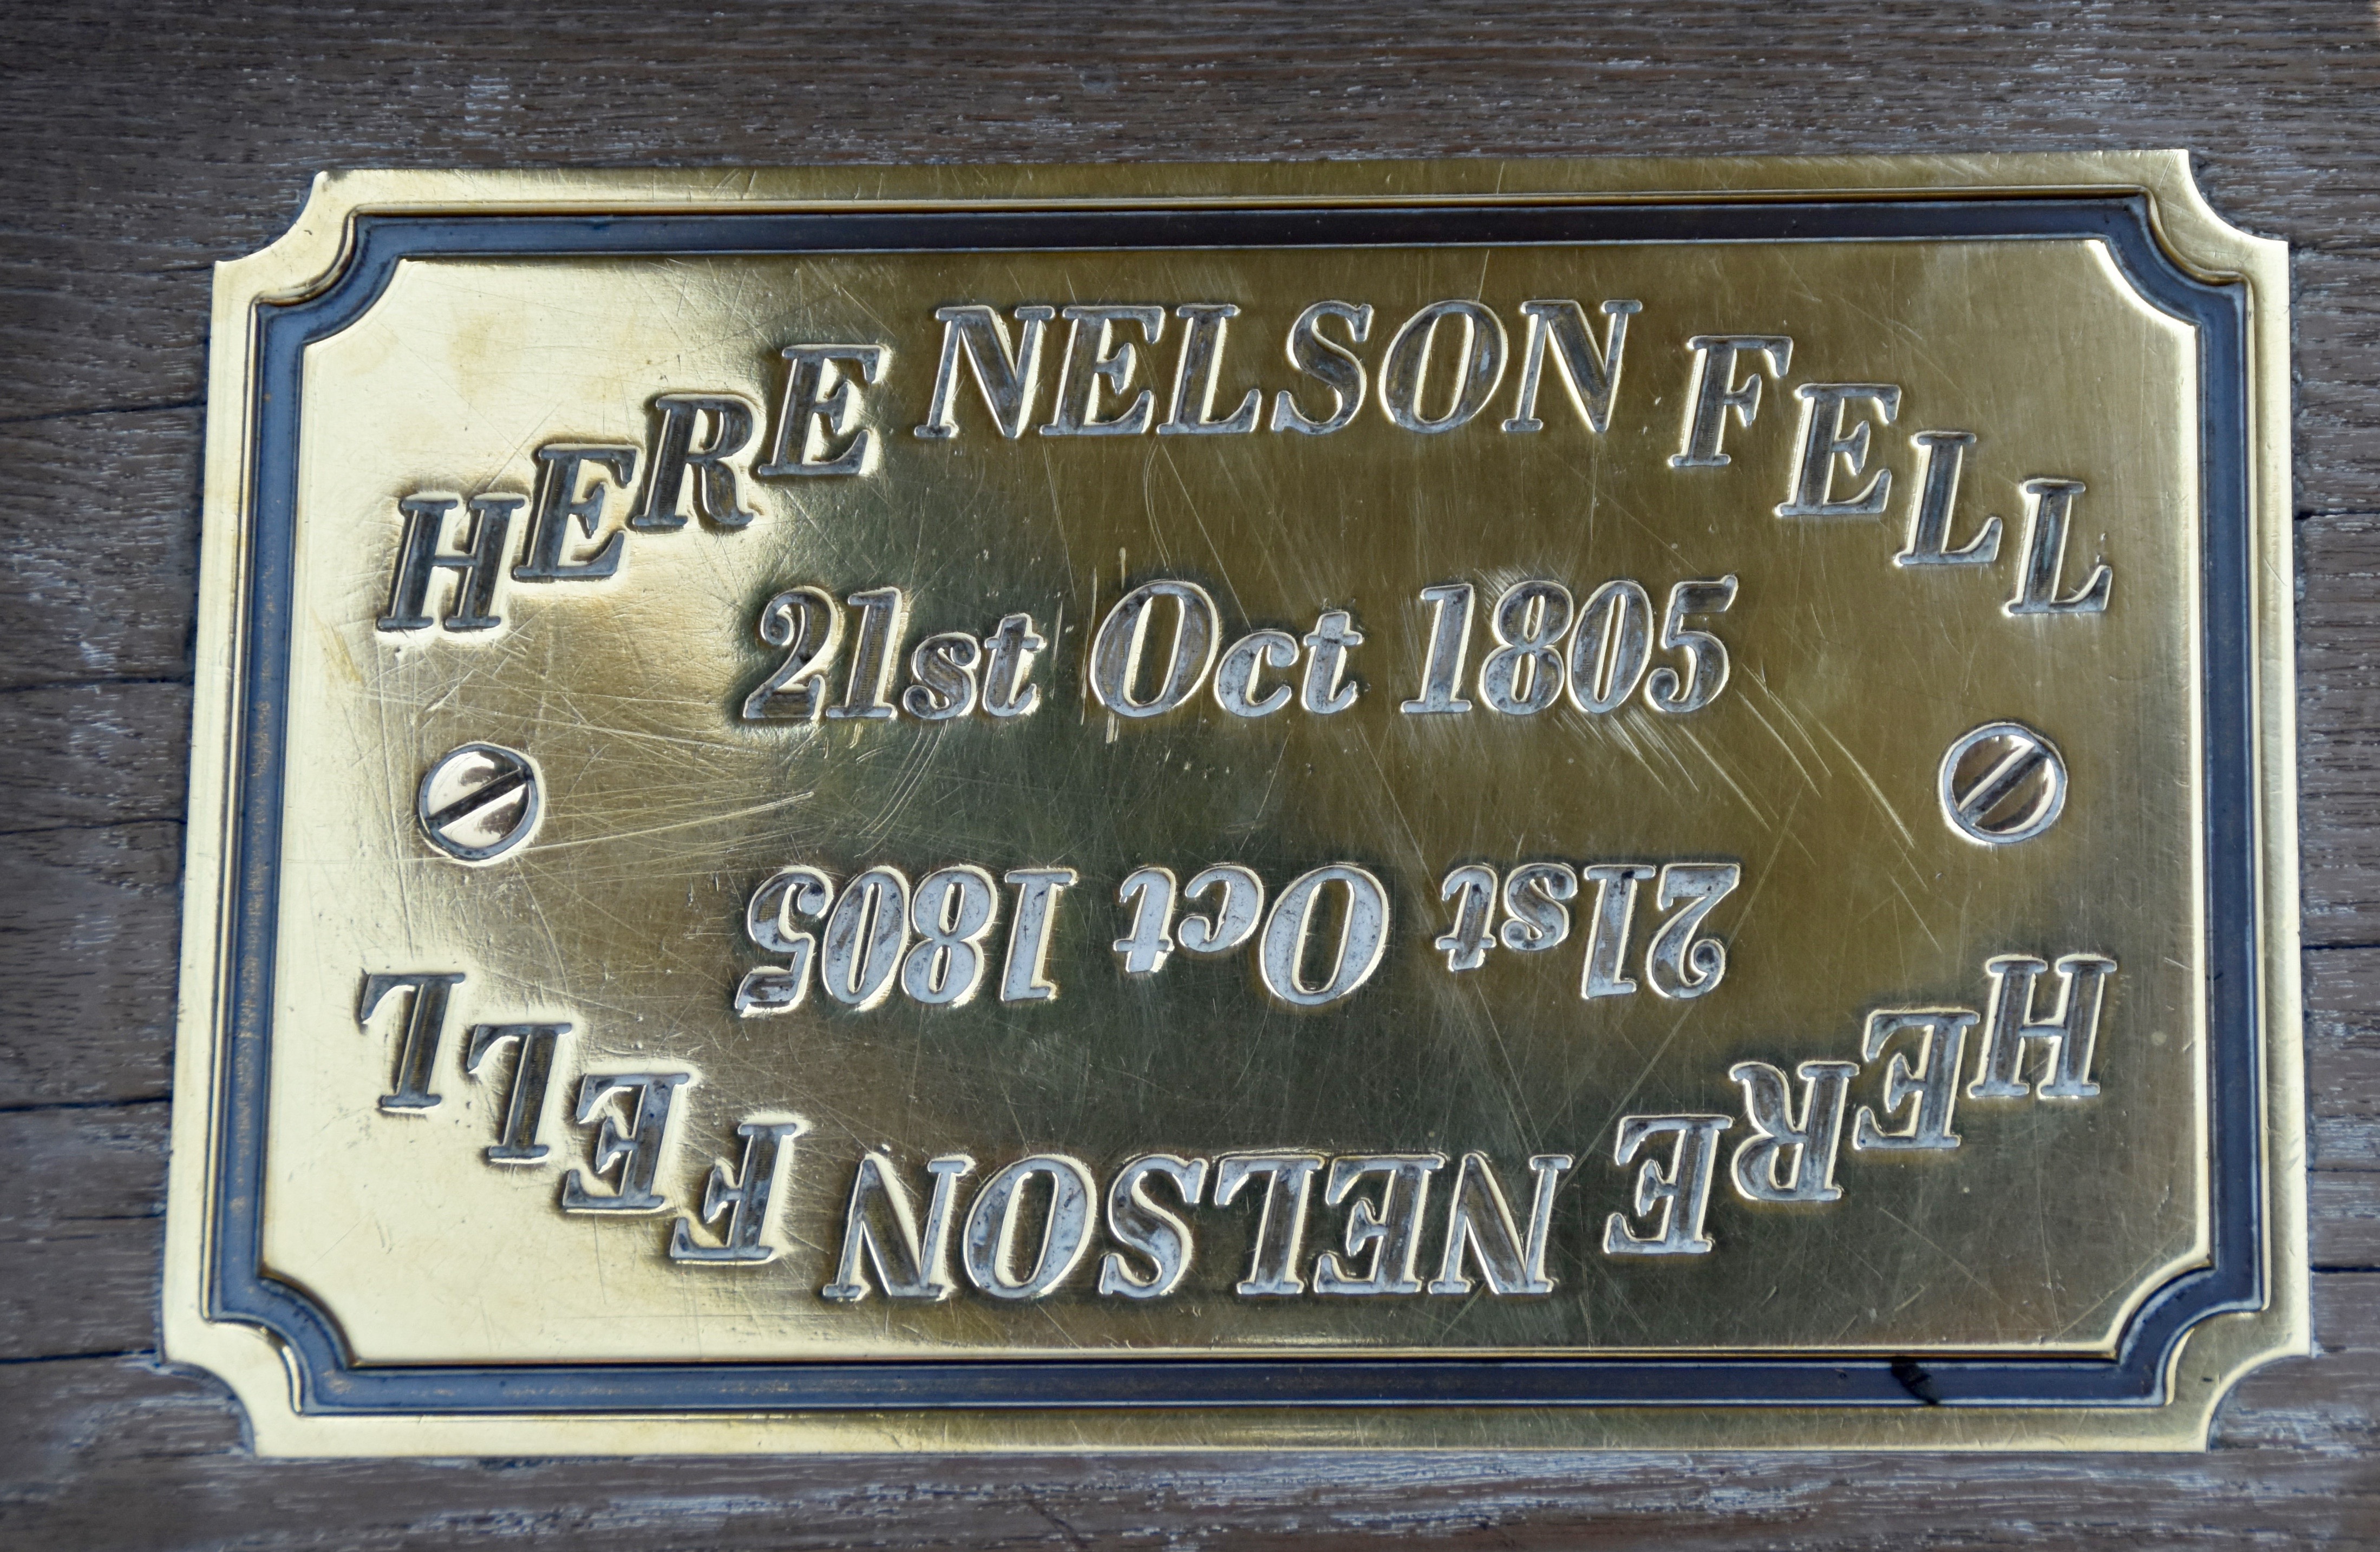 Here Nelson Fell on HMS Victory